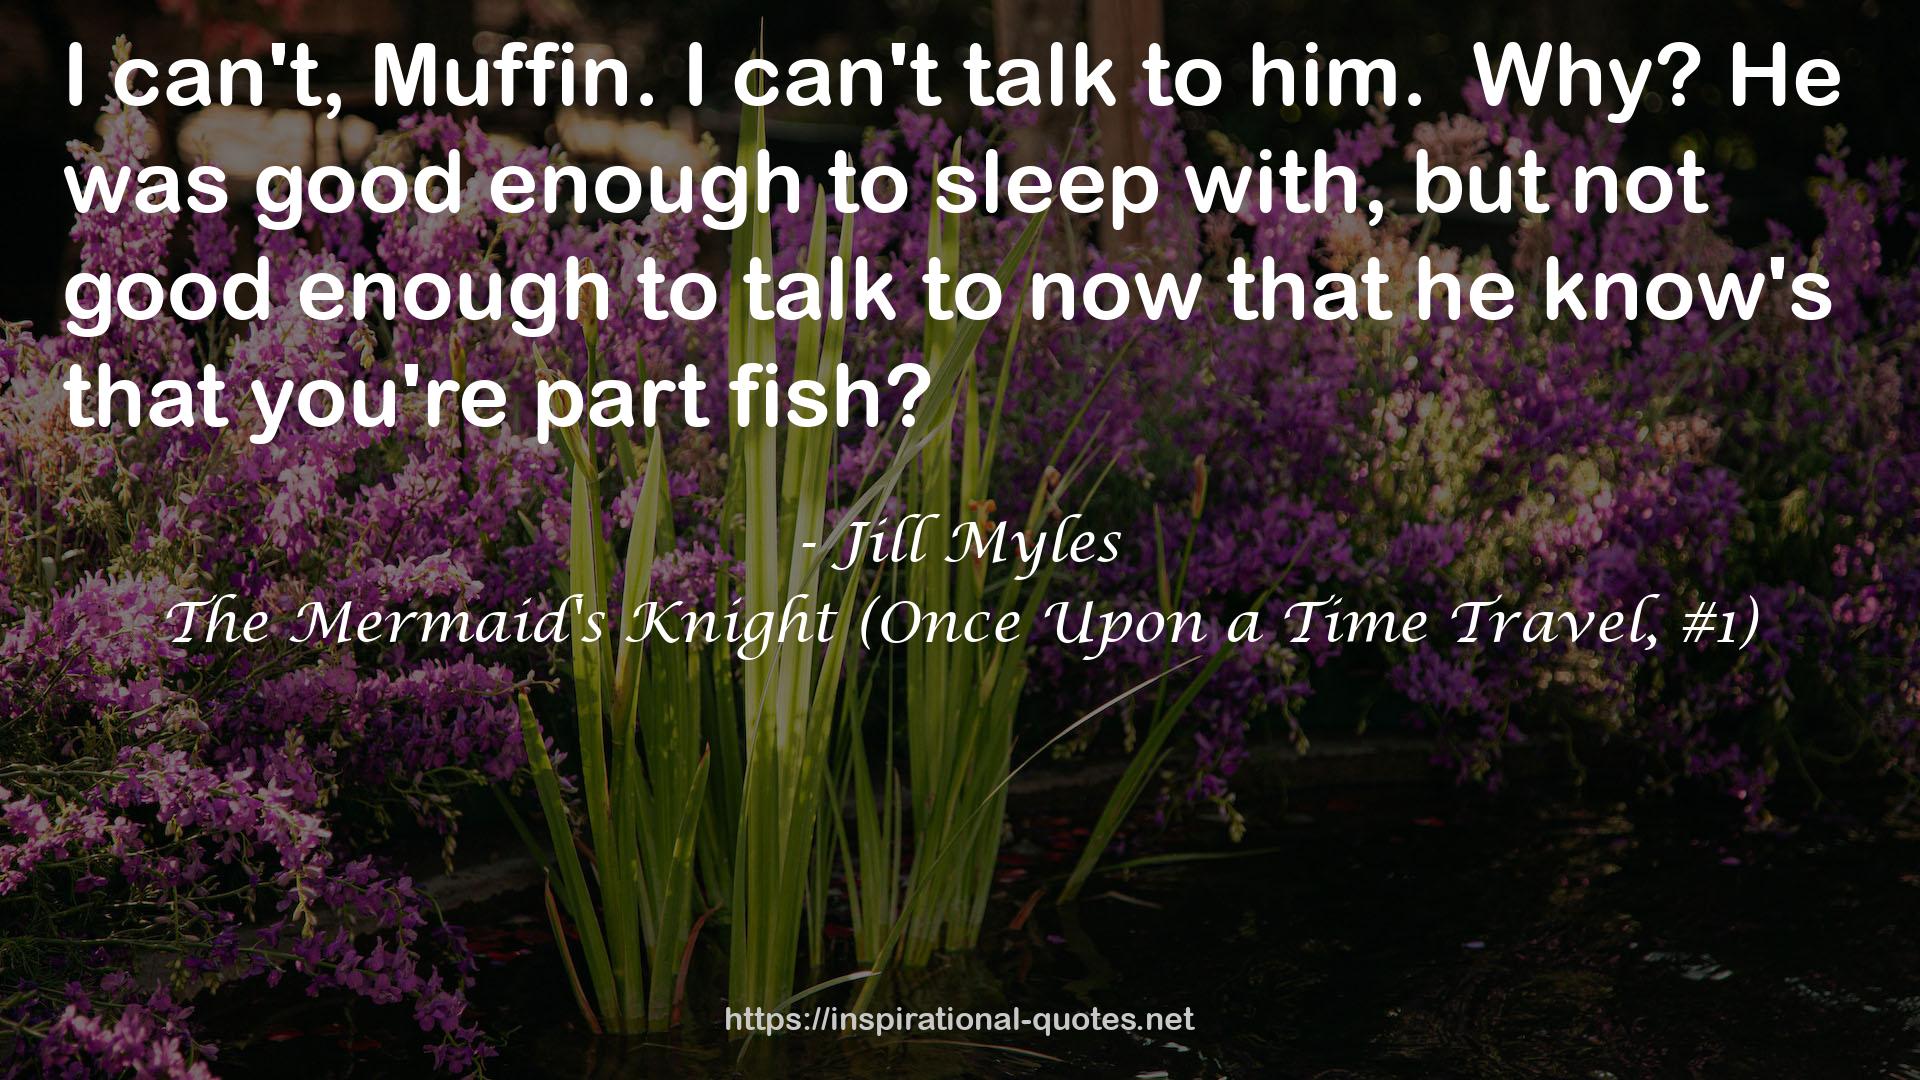 The Mermaid's Knight (Once Upon a Time Travel, #1) QUOTES